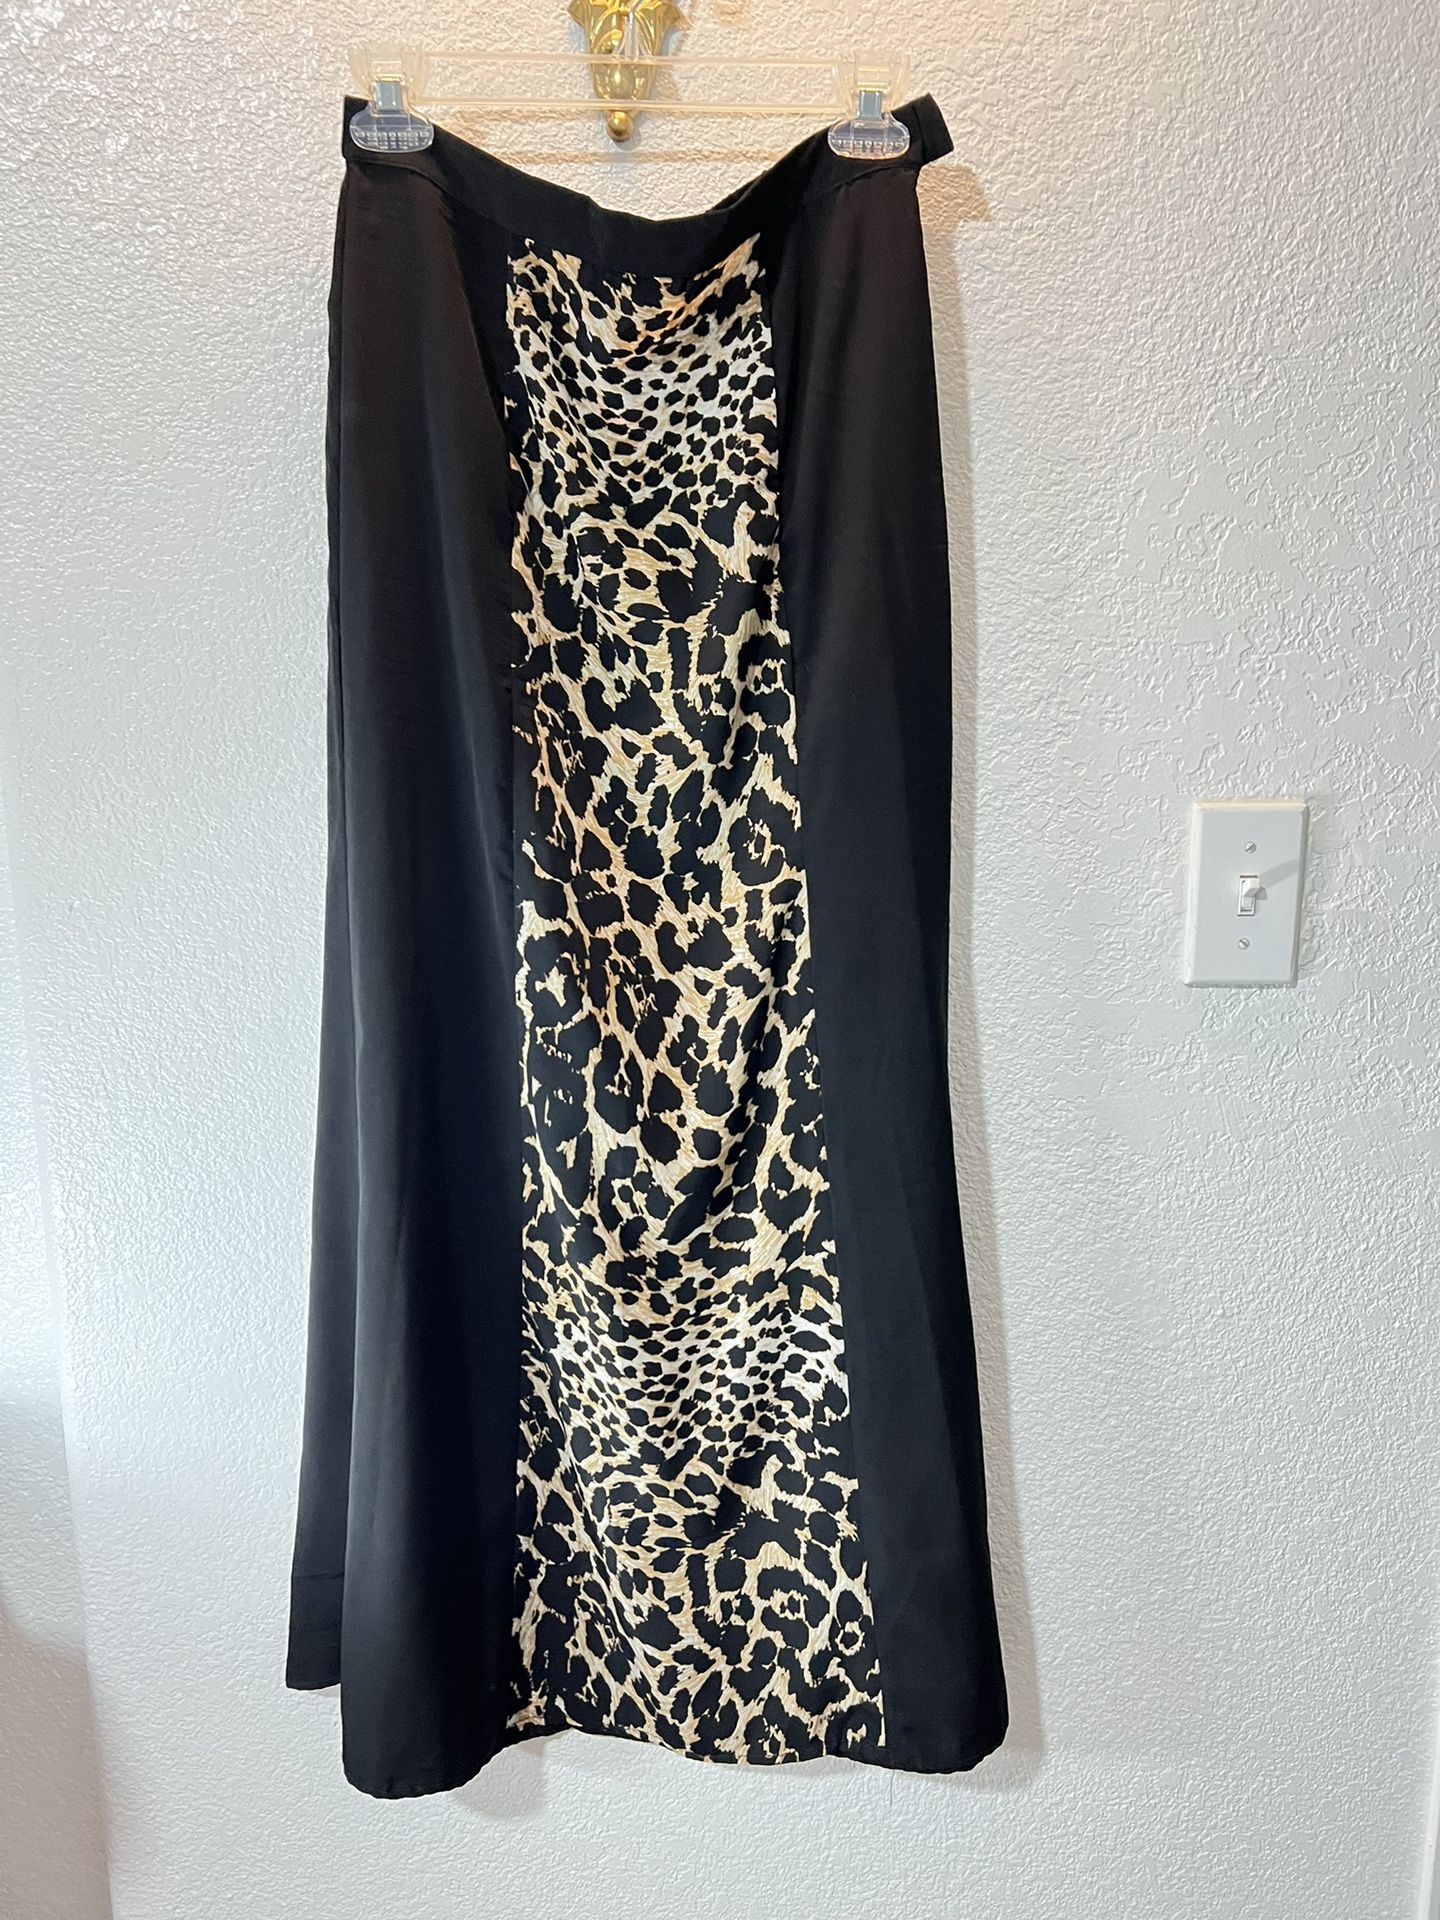 Forever 21 Trendy Maxi High Waisted Skirt Animal Print with Slit |Size M